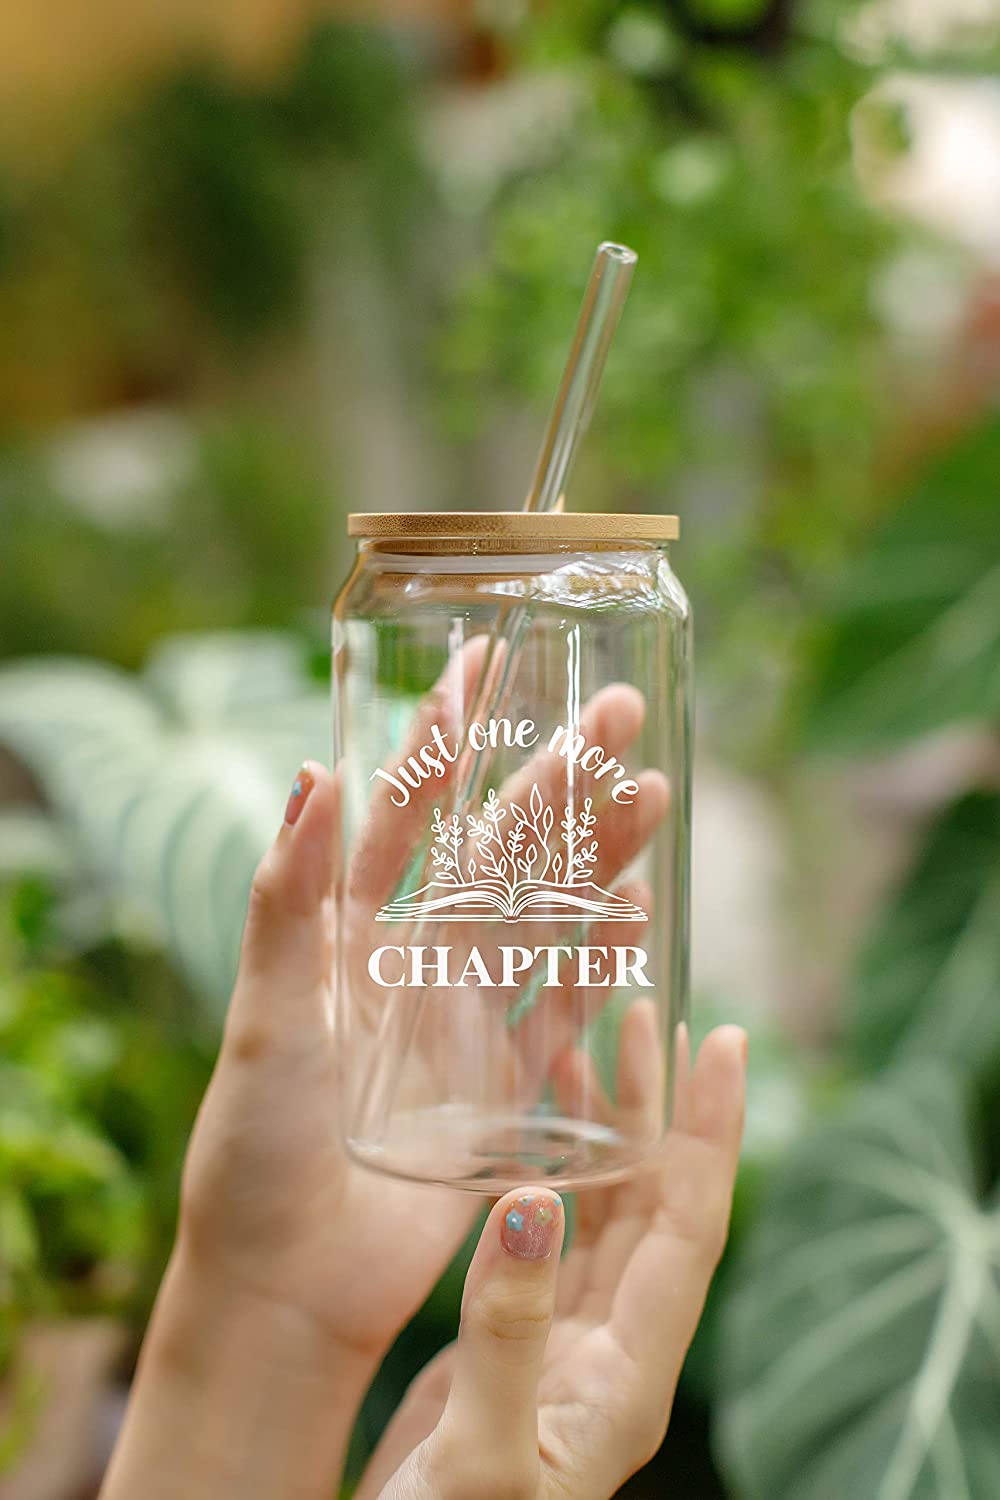 Just One More Chapter Coffee - 16 Oz Coffee Glass